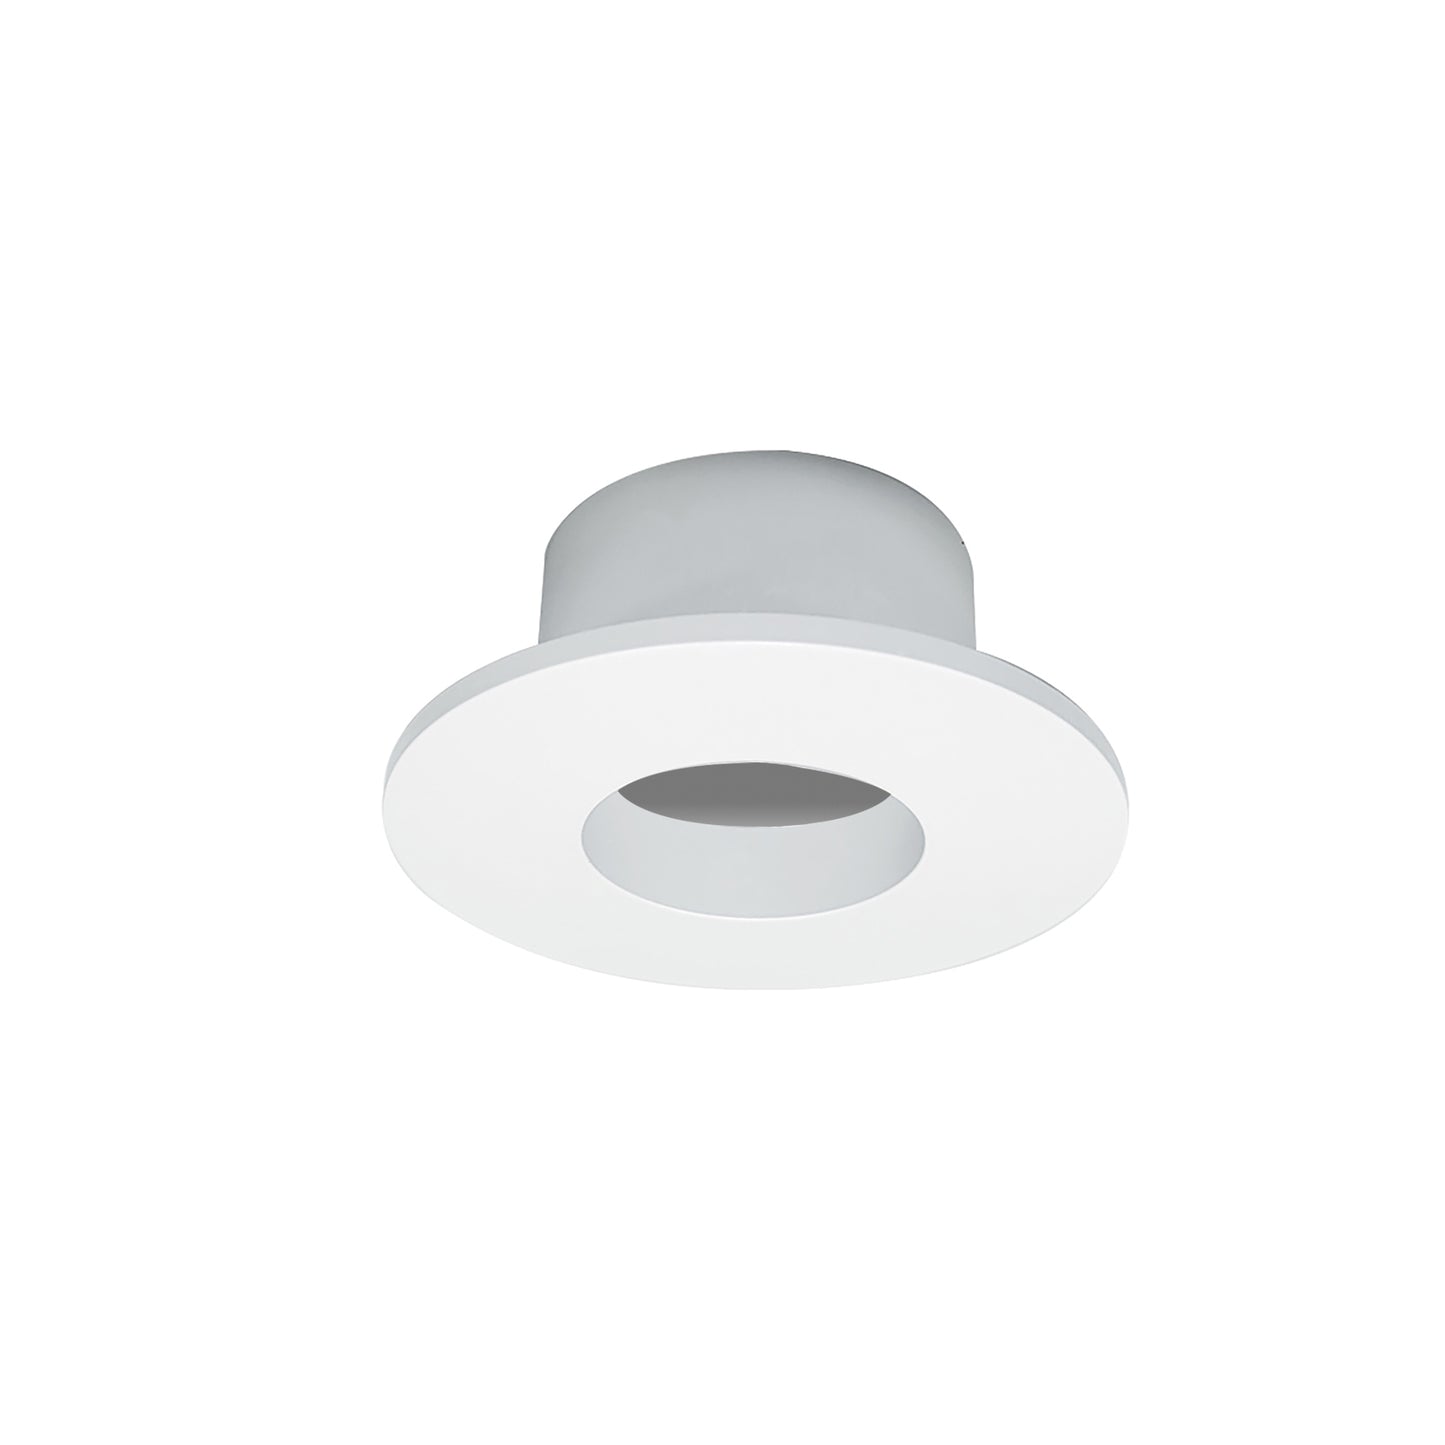 1-Inch Nora Lighting Iolite LED Recessed Downlight Trim -  Can-less Round Fixture 3